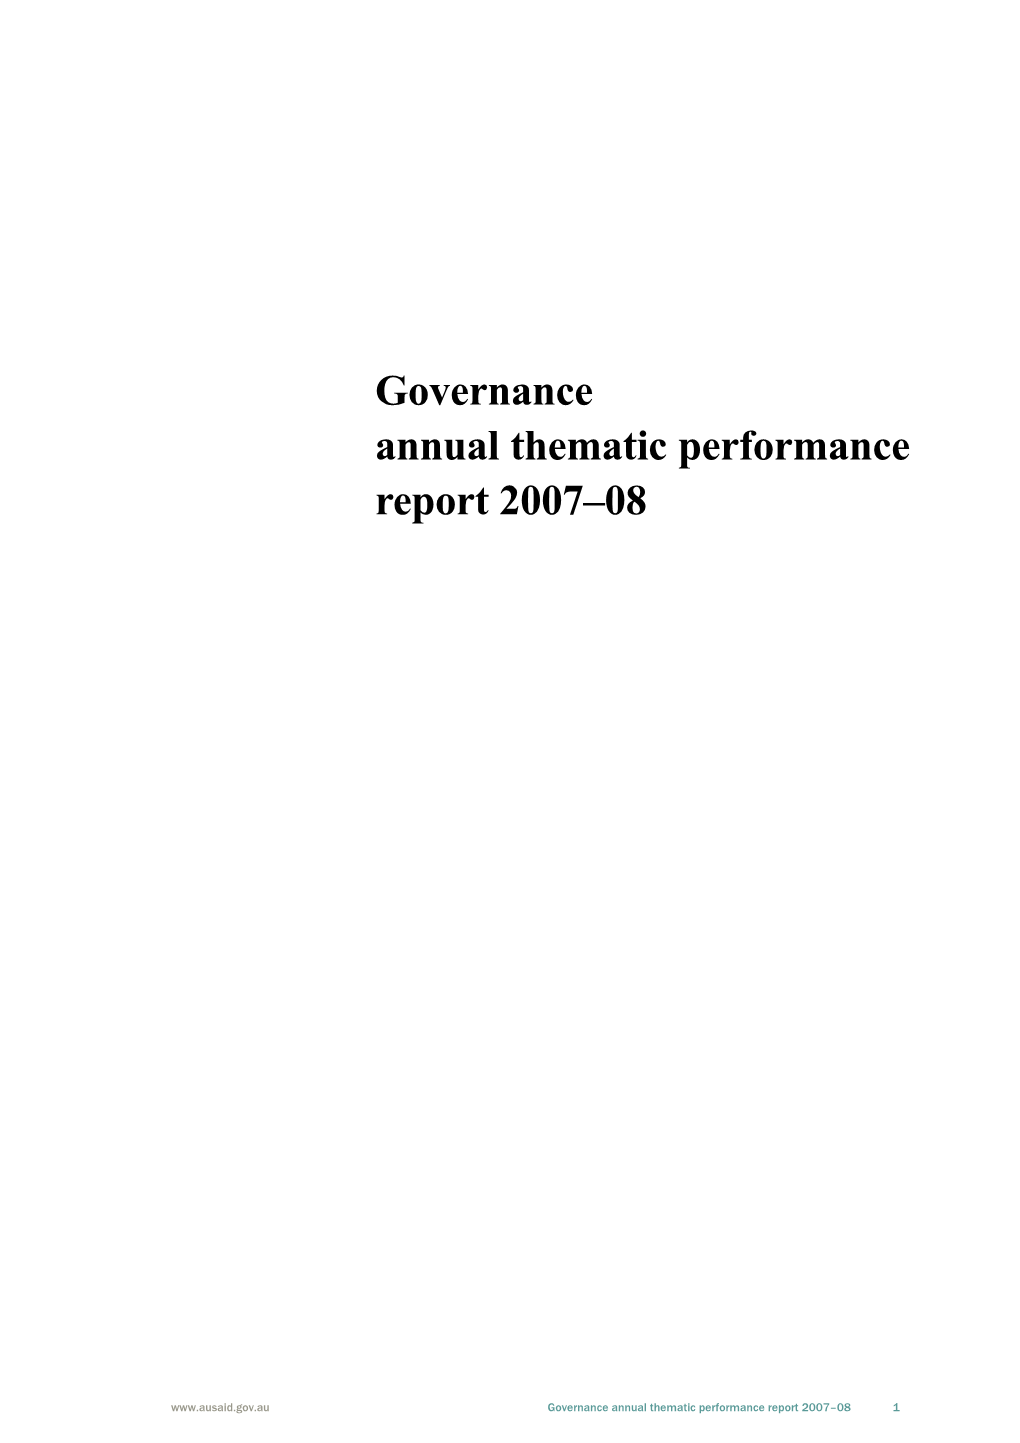 Governance Annualthematicperformance Report 2007 08